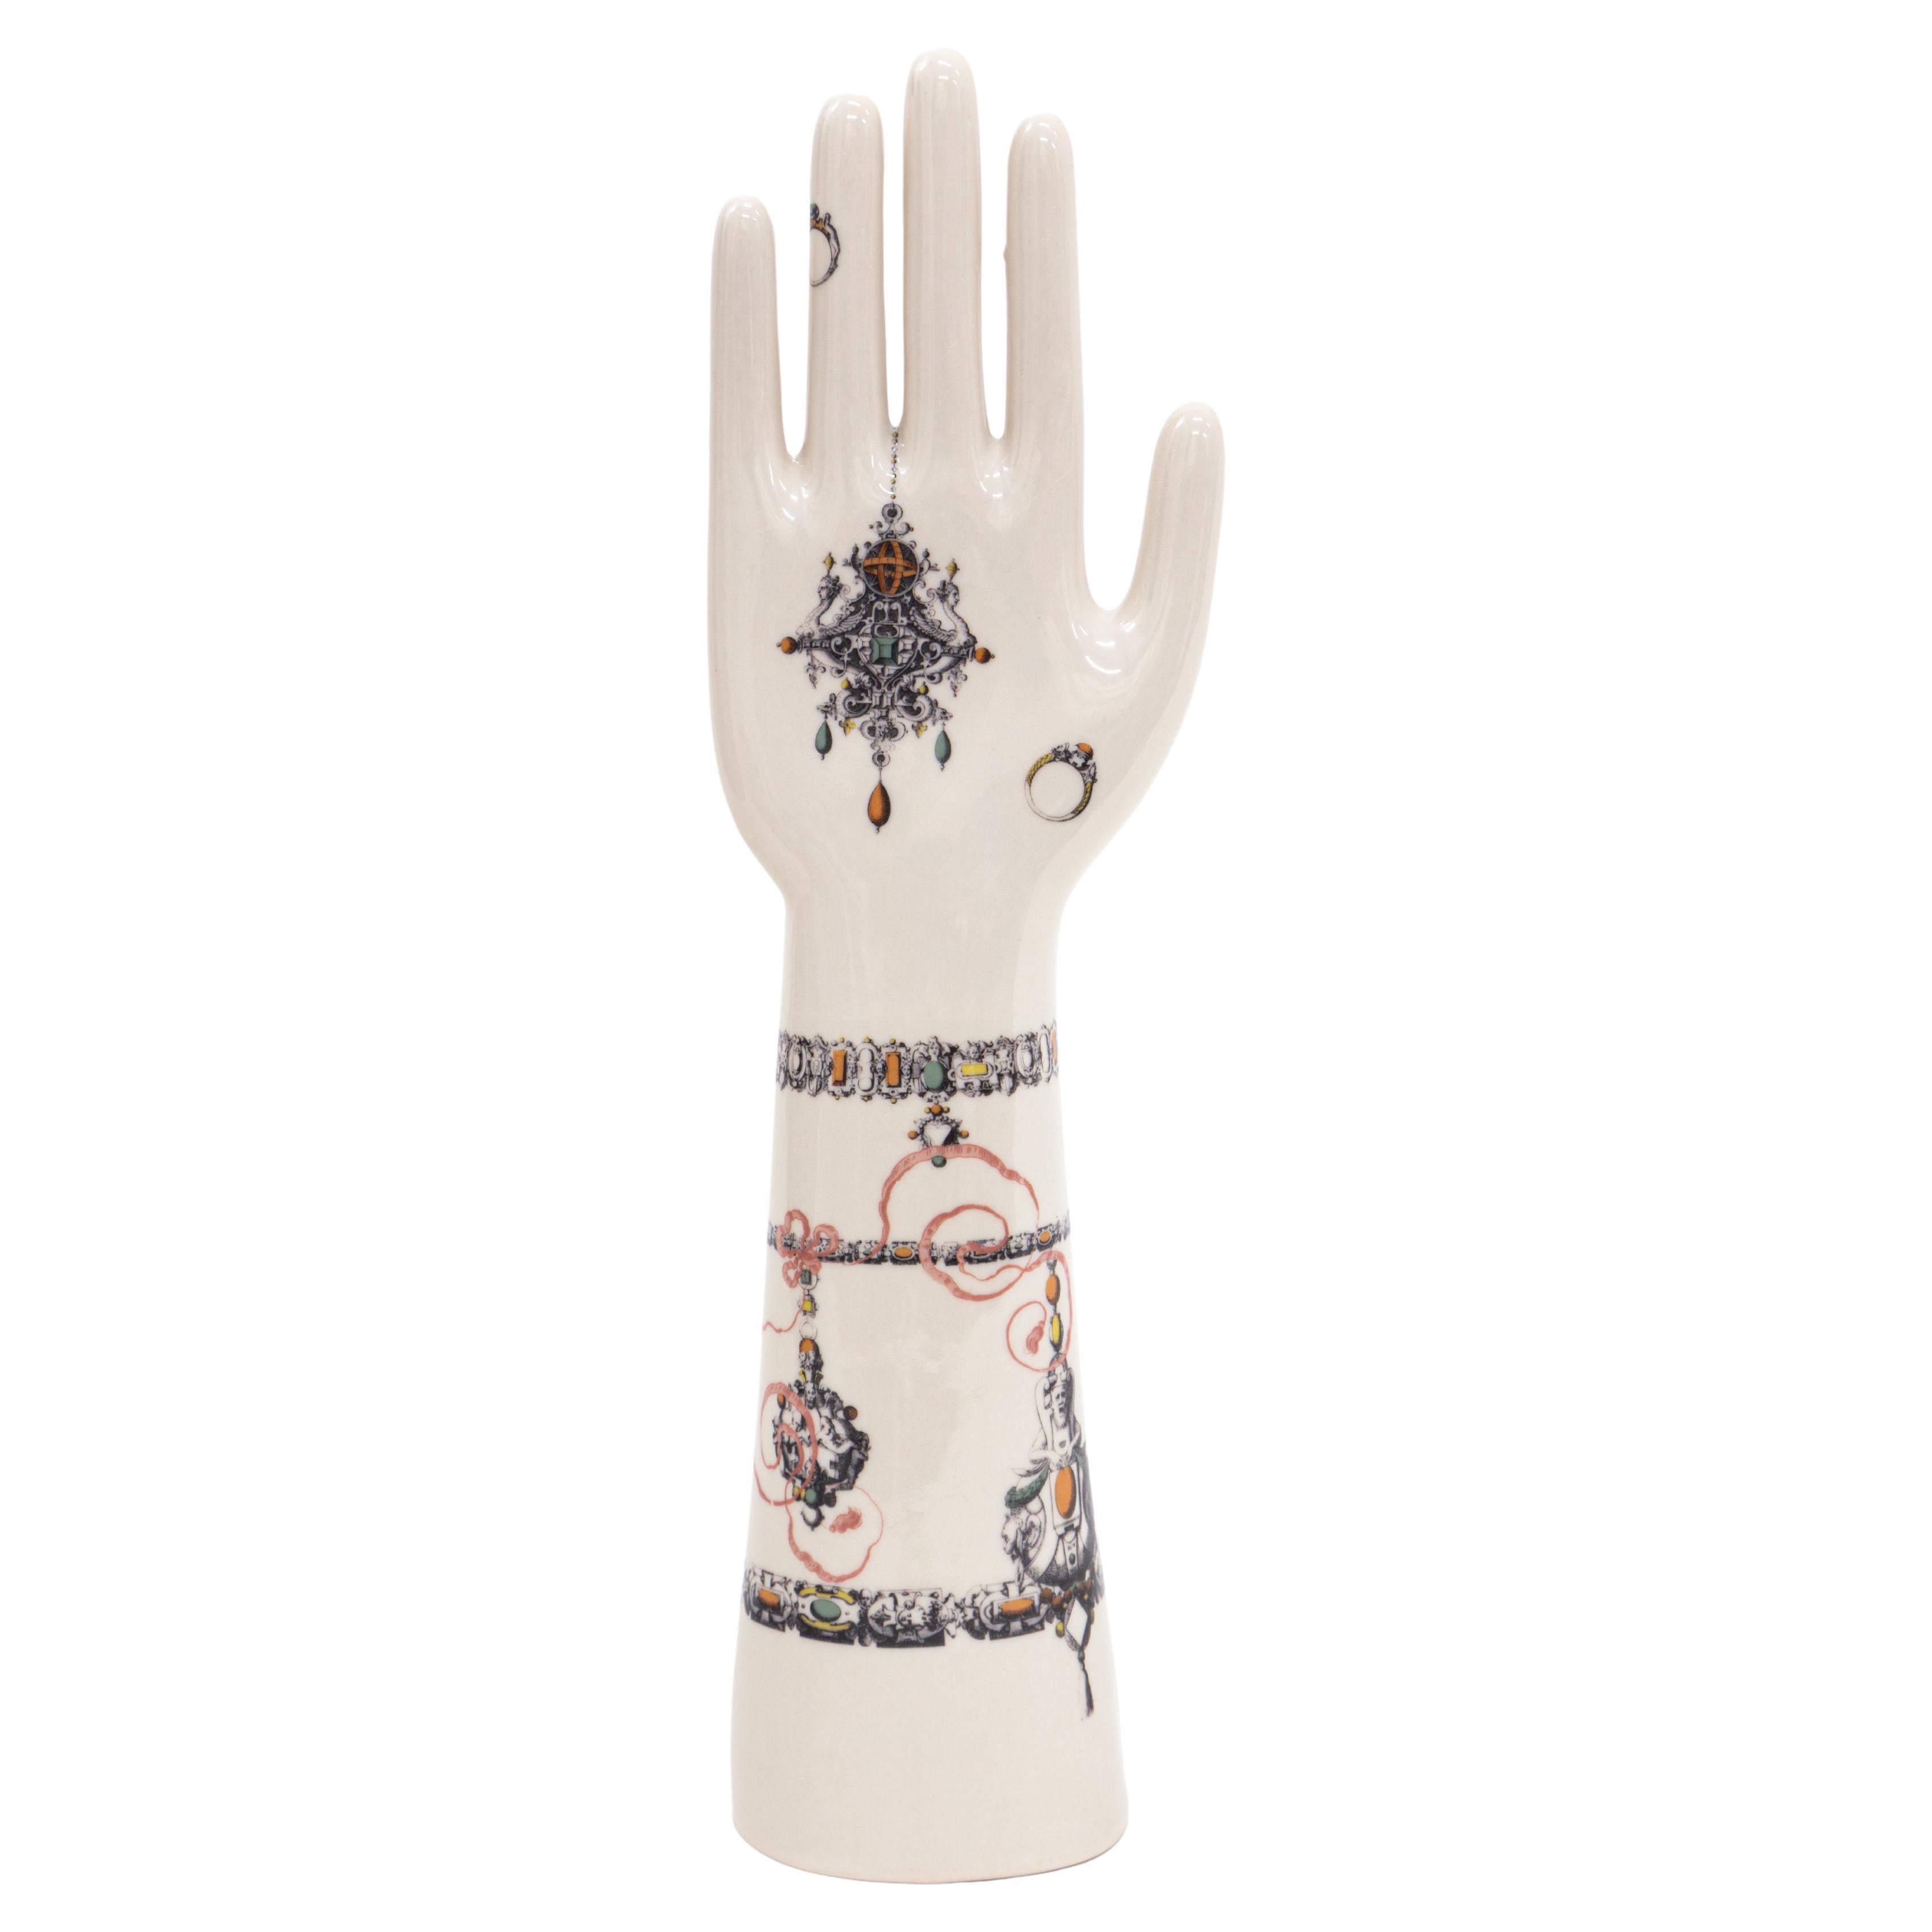 Anatomica, Porcelain Hand with Jewels Decoration by Vito Nesta For Sale